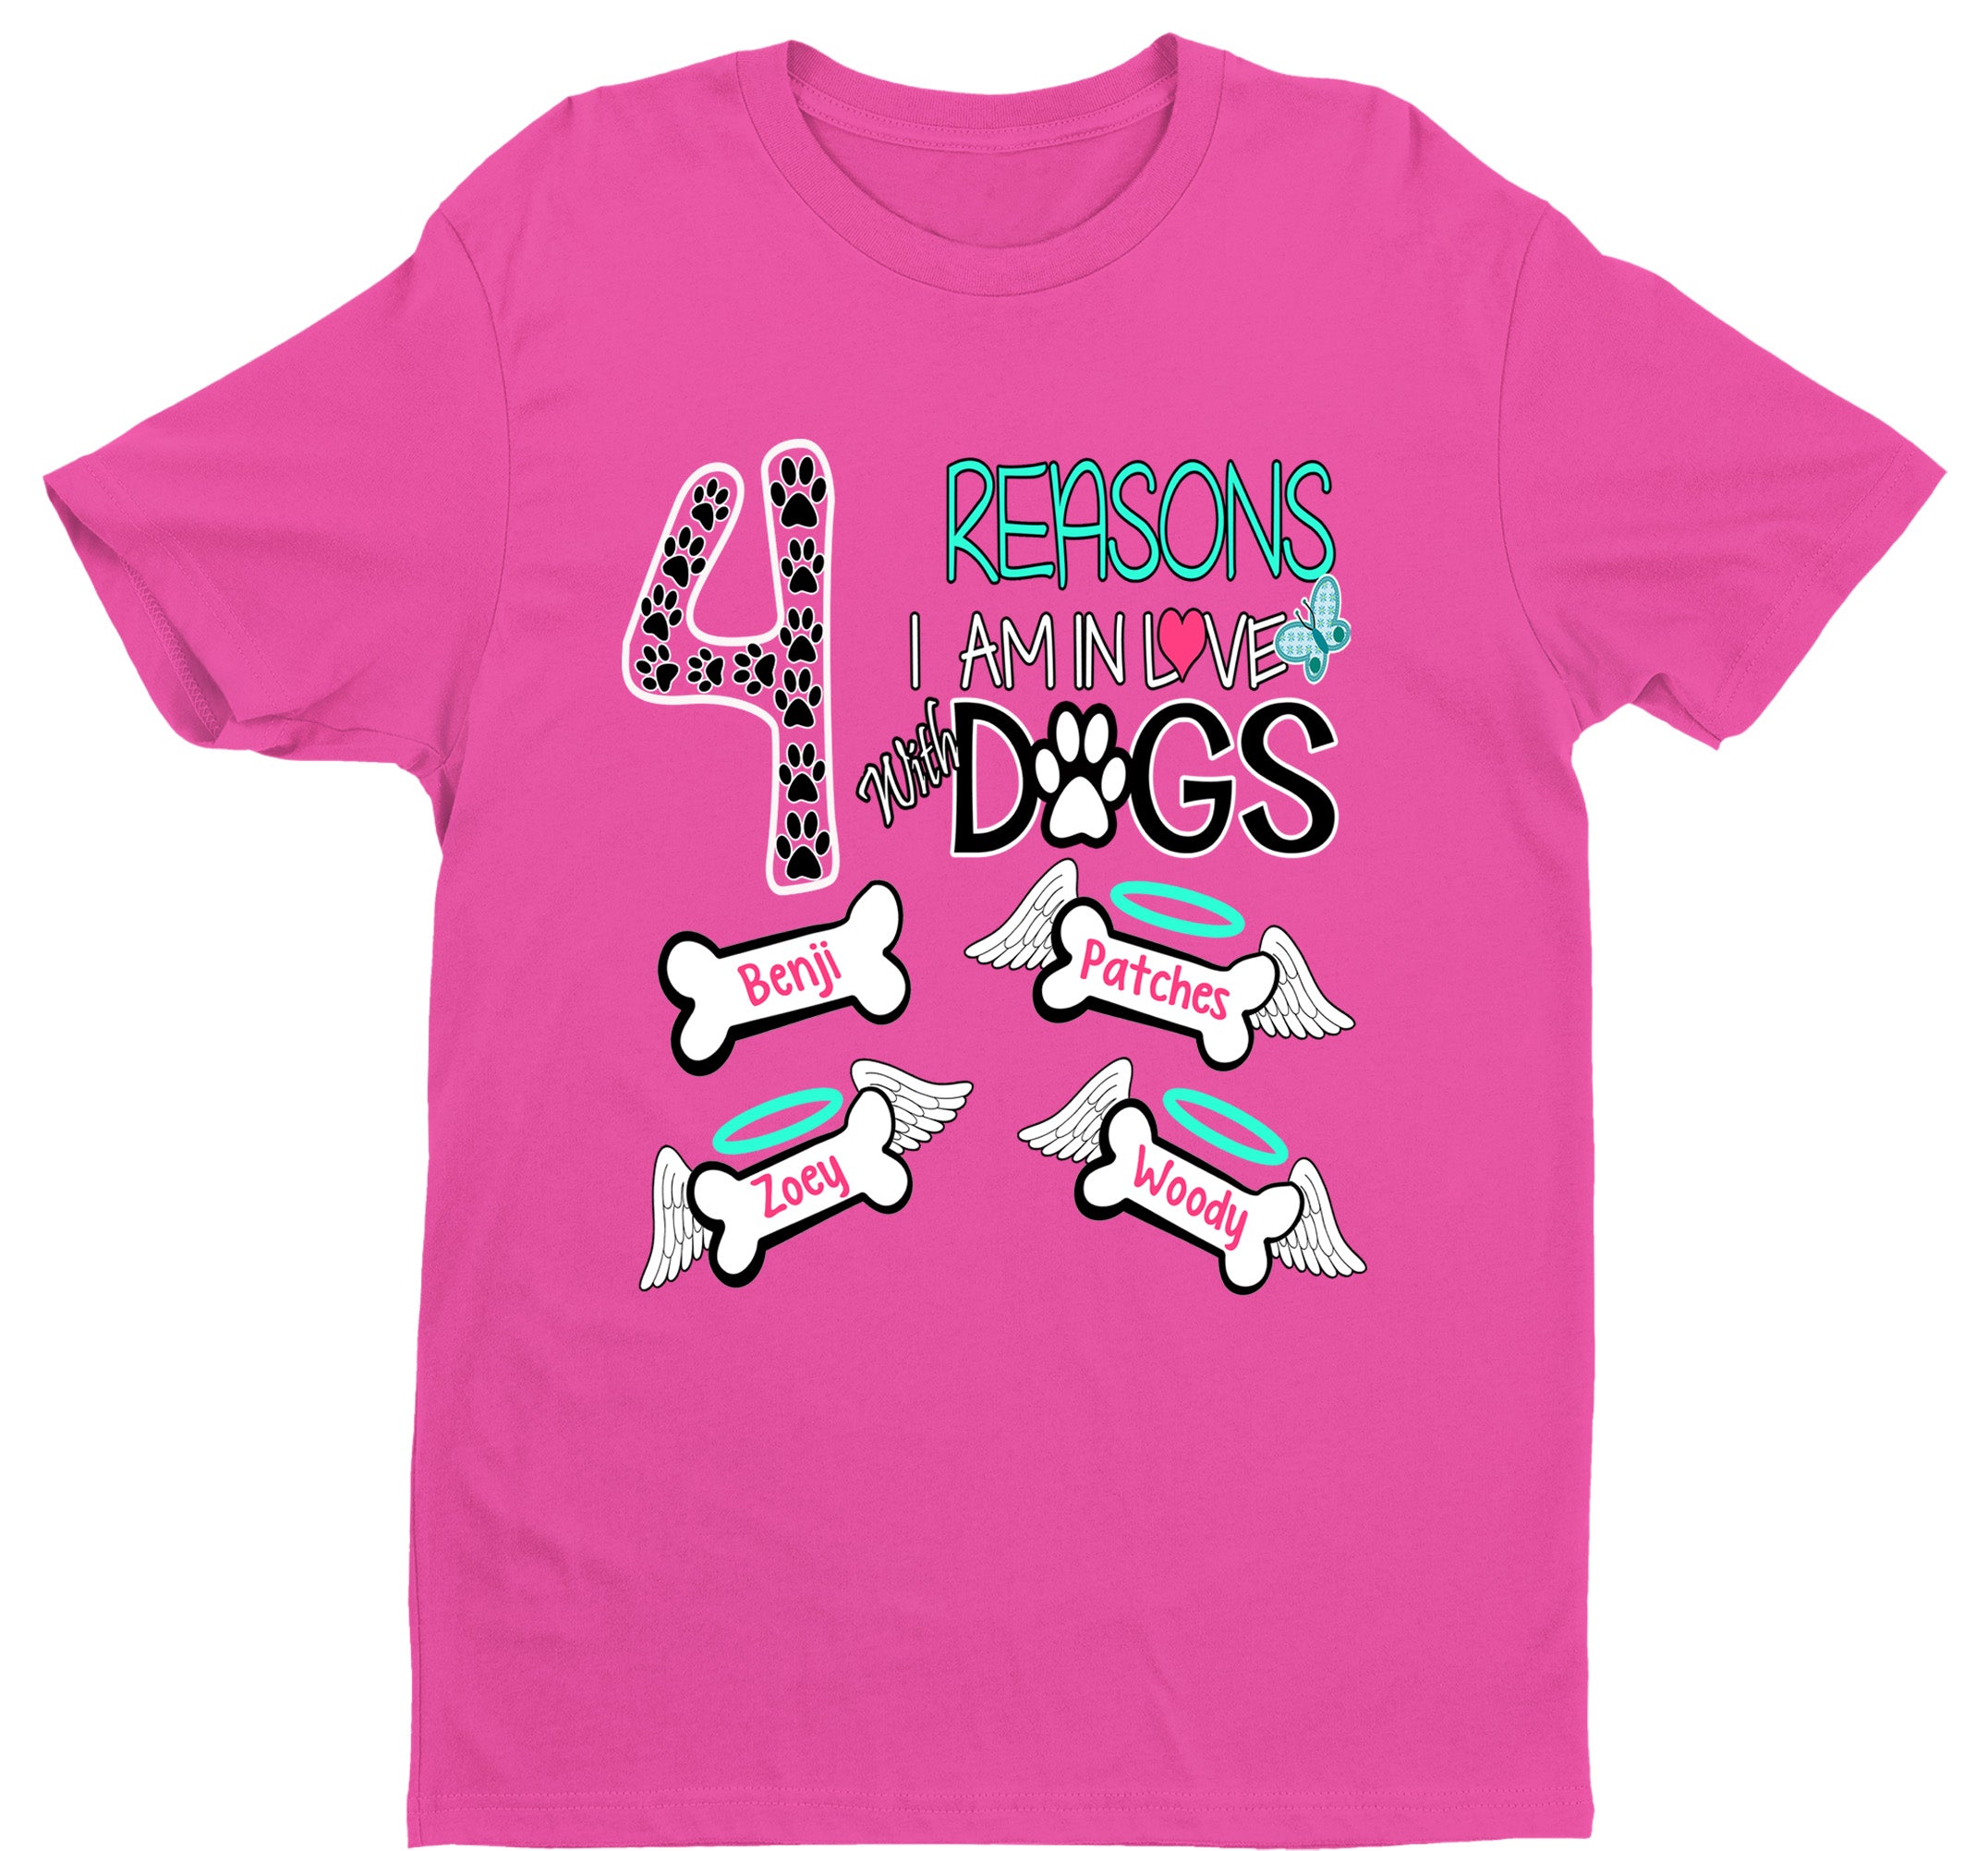 "(Number) Reasons I Am In Love With Dogs" Custom T-Shirt